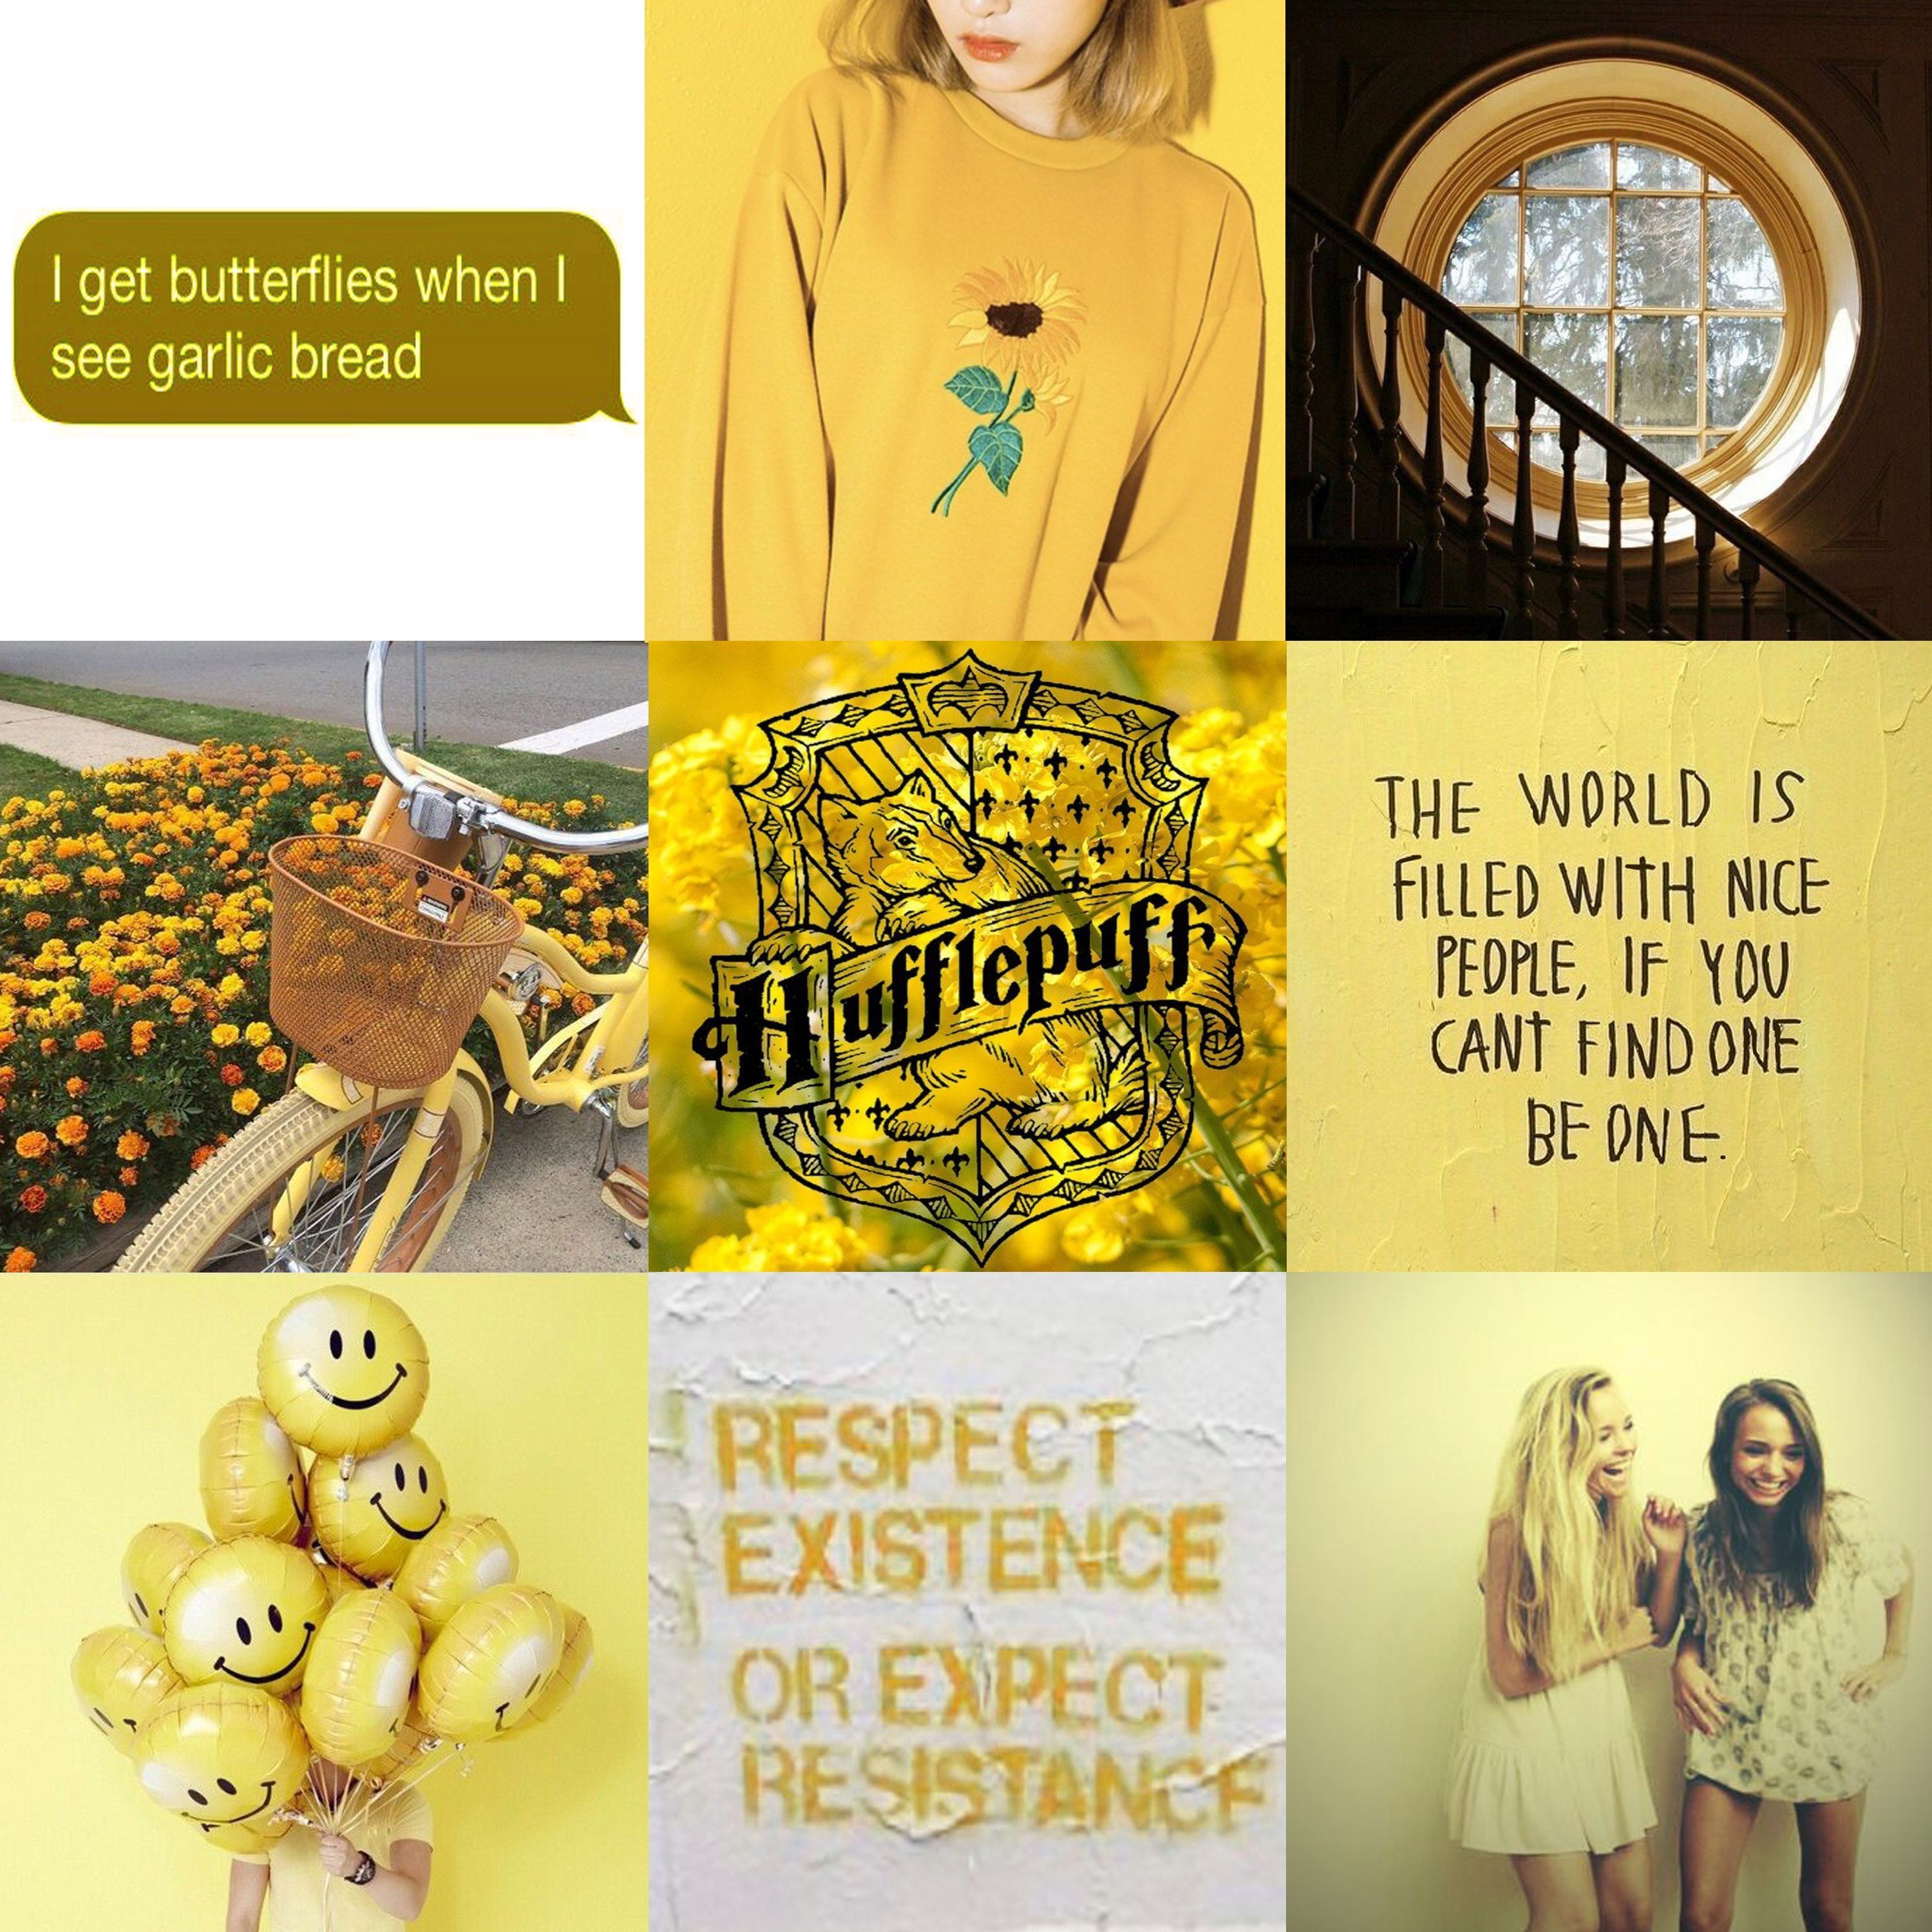 Collage of images representing the aesthetic of the Harry Potter series, specifically the Hufflepuff house. - Hufflepuff